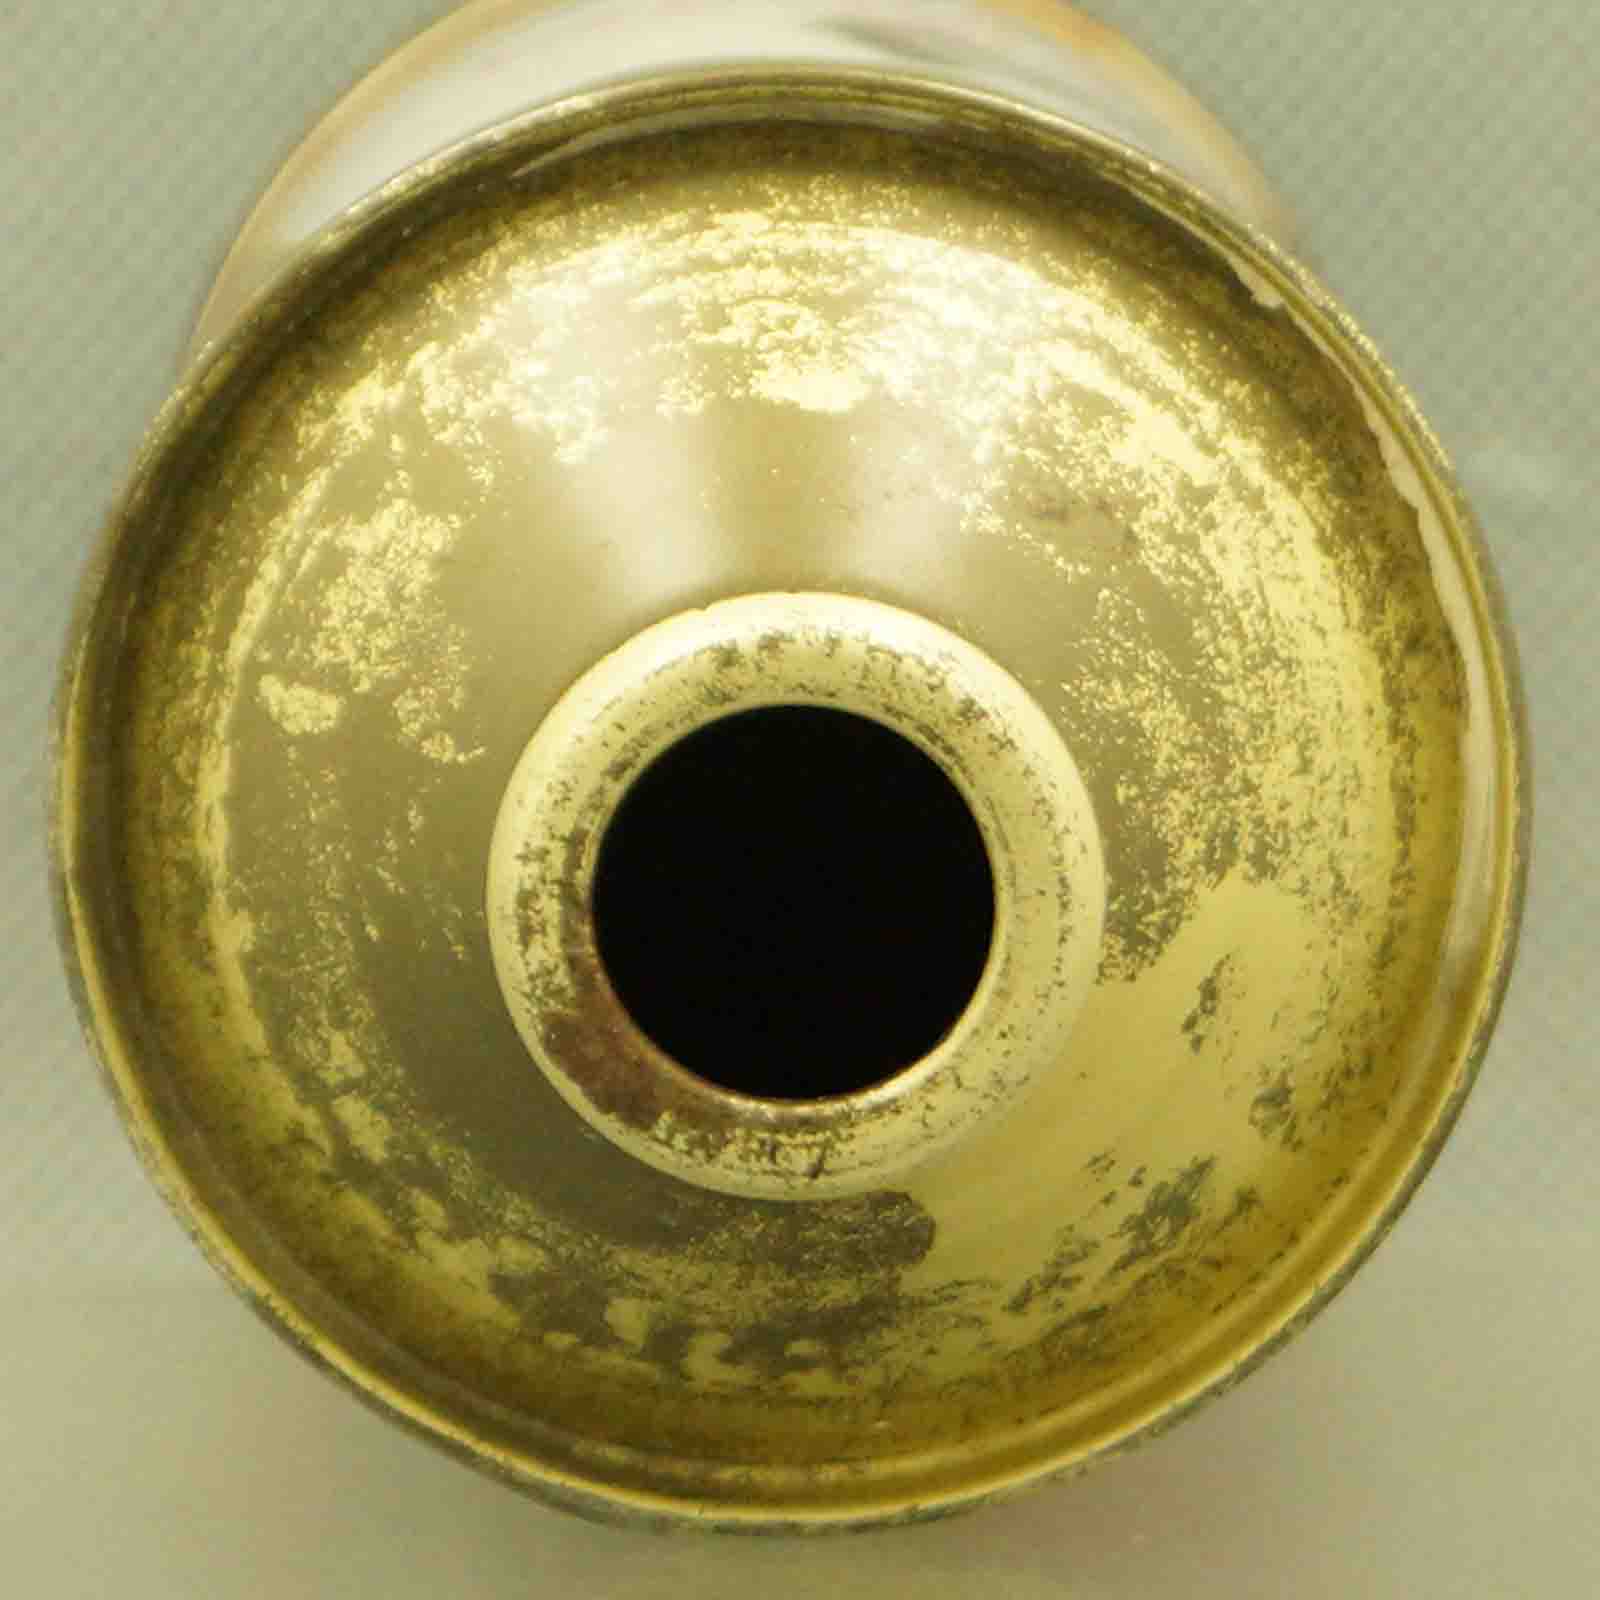 iroquois 170-12 cone top beer can 5